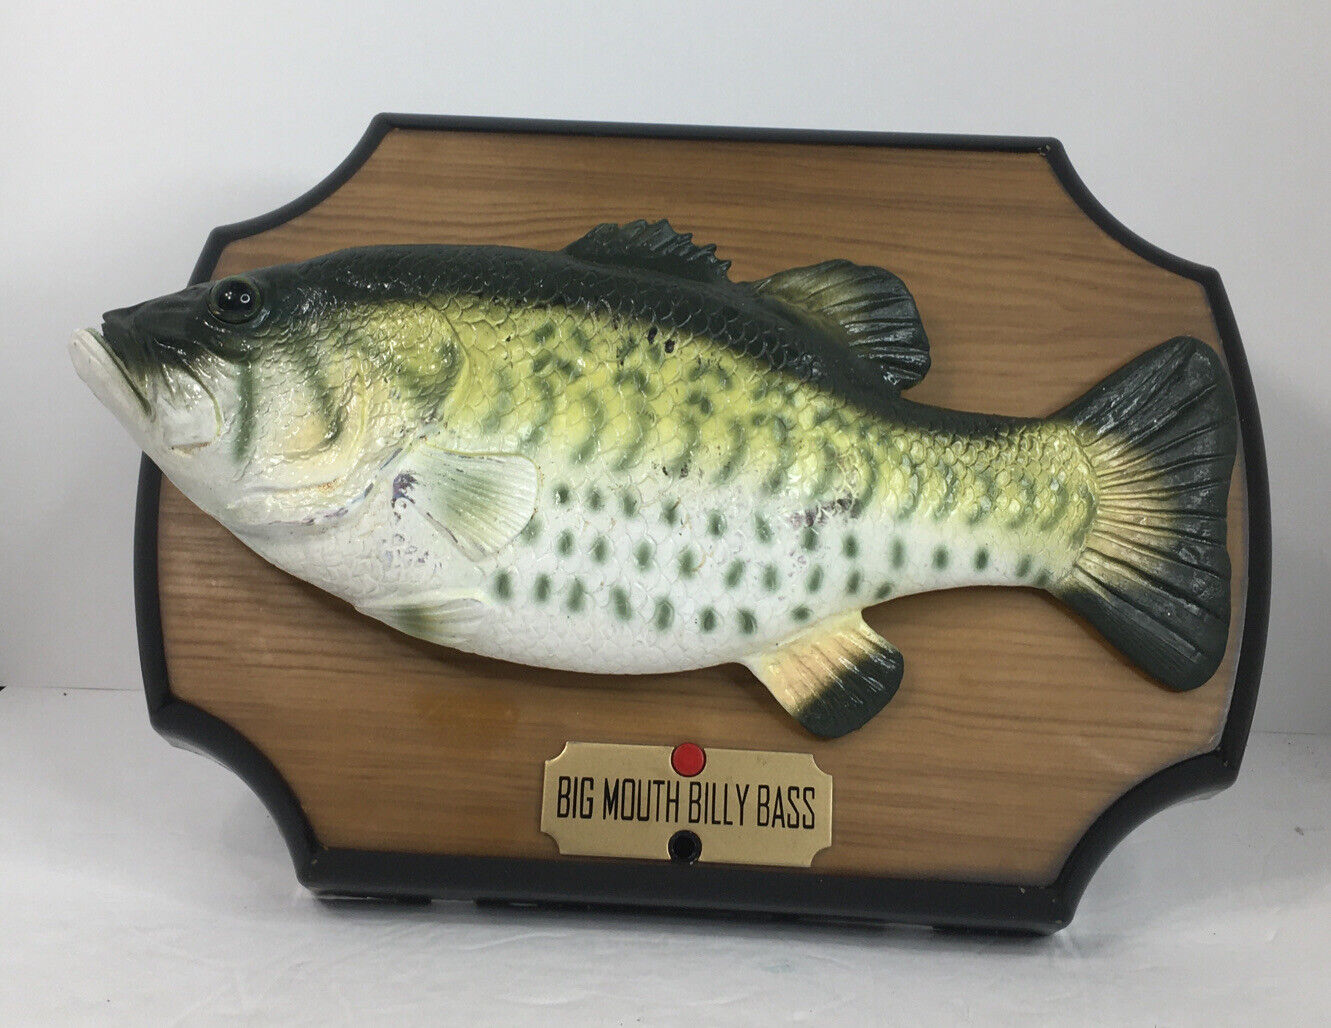 Big Mouth Billy Bass Singing Fish 1999 Don't Worry Take Me To The River Video